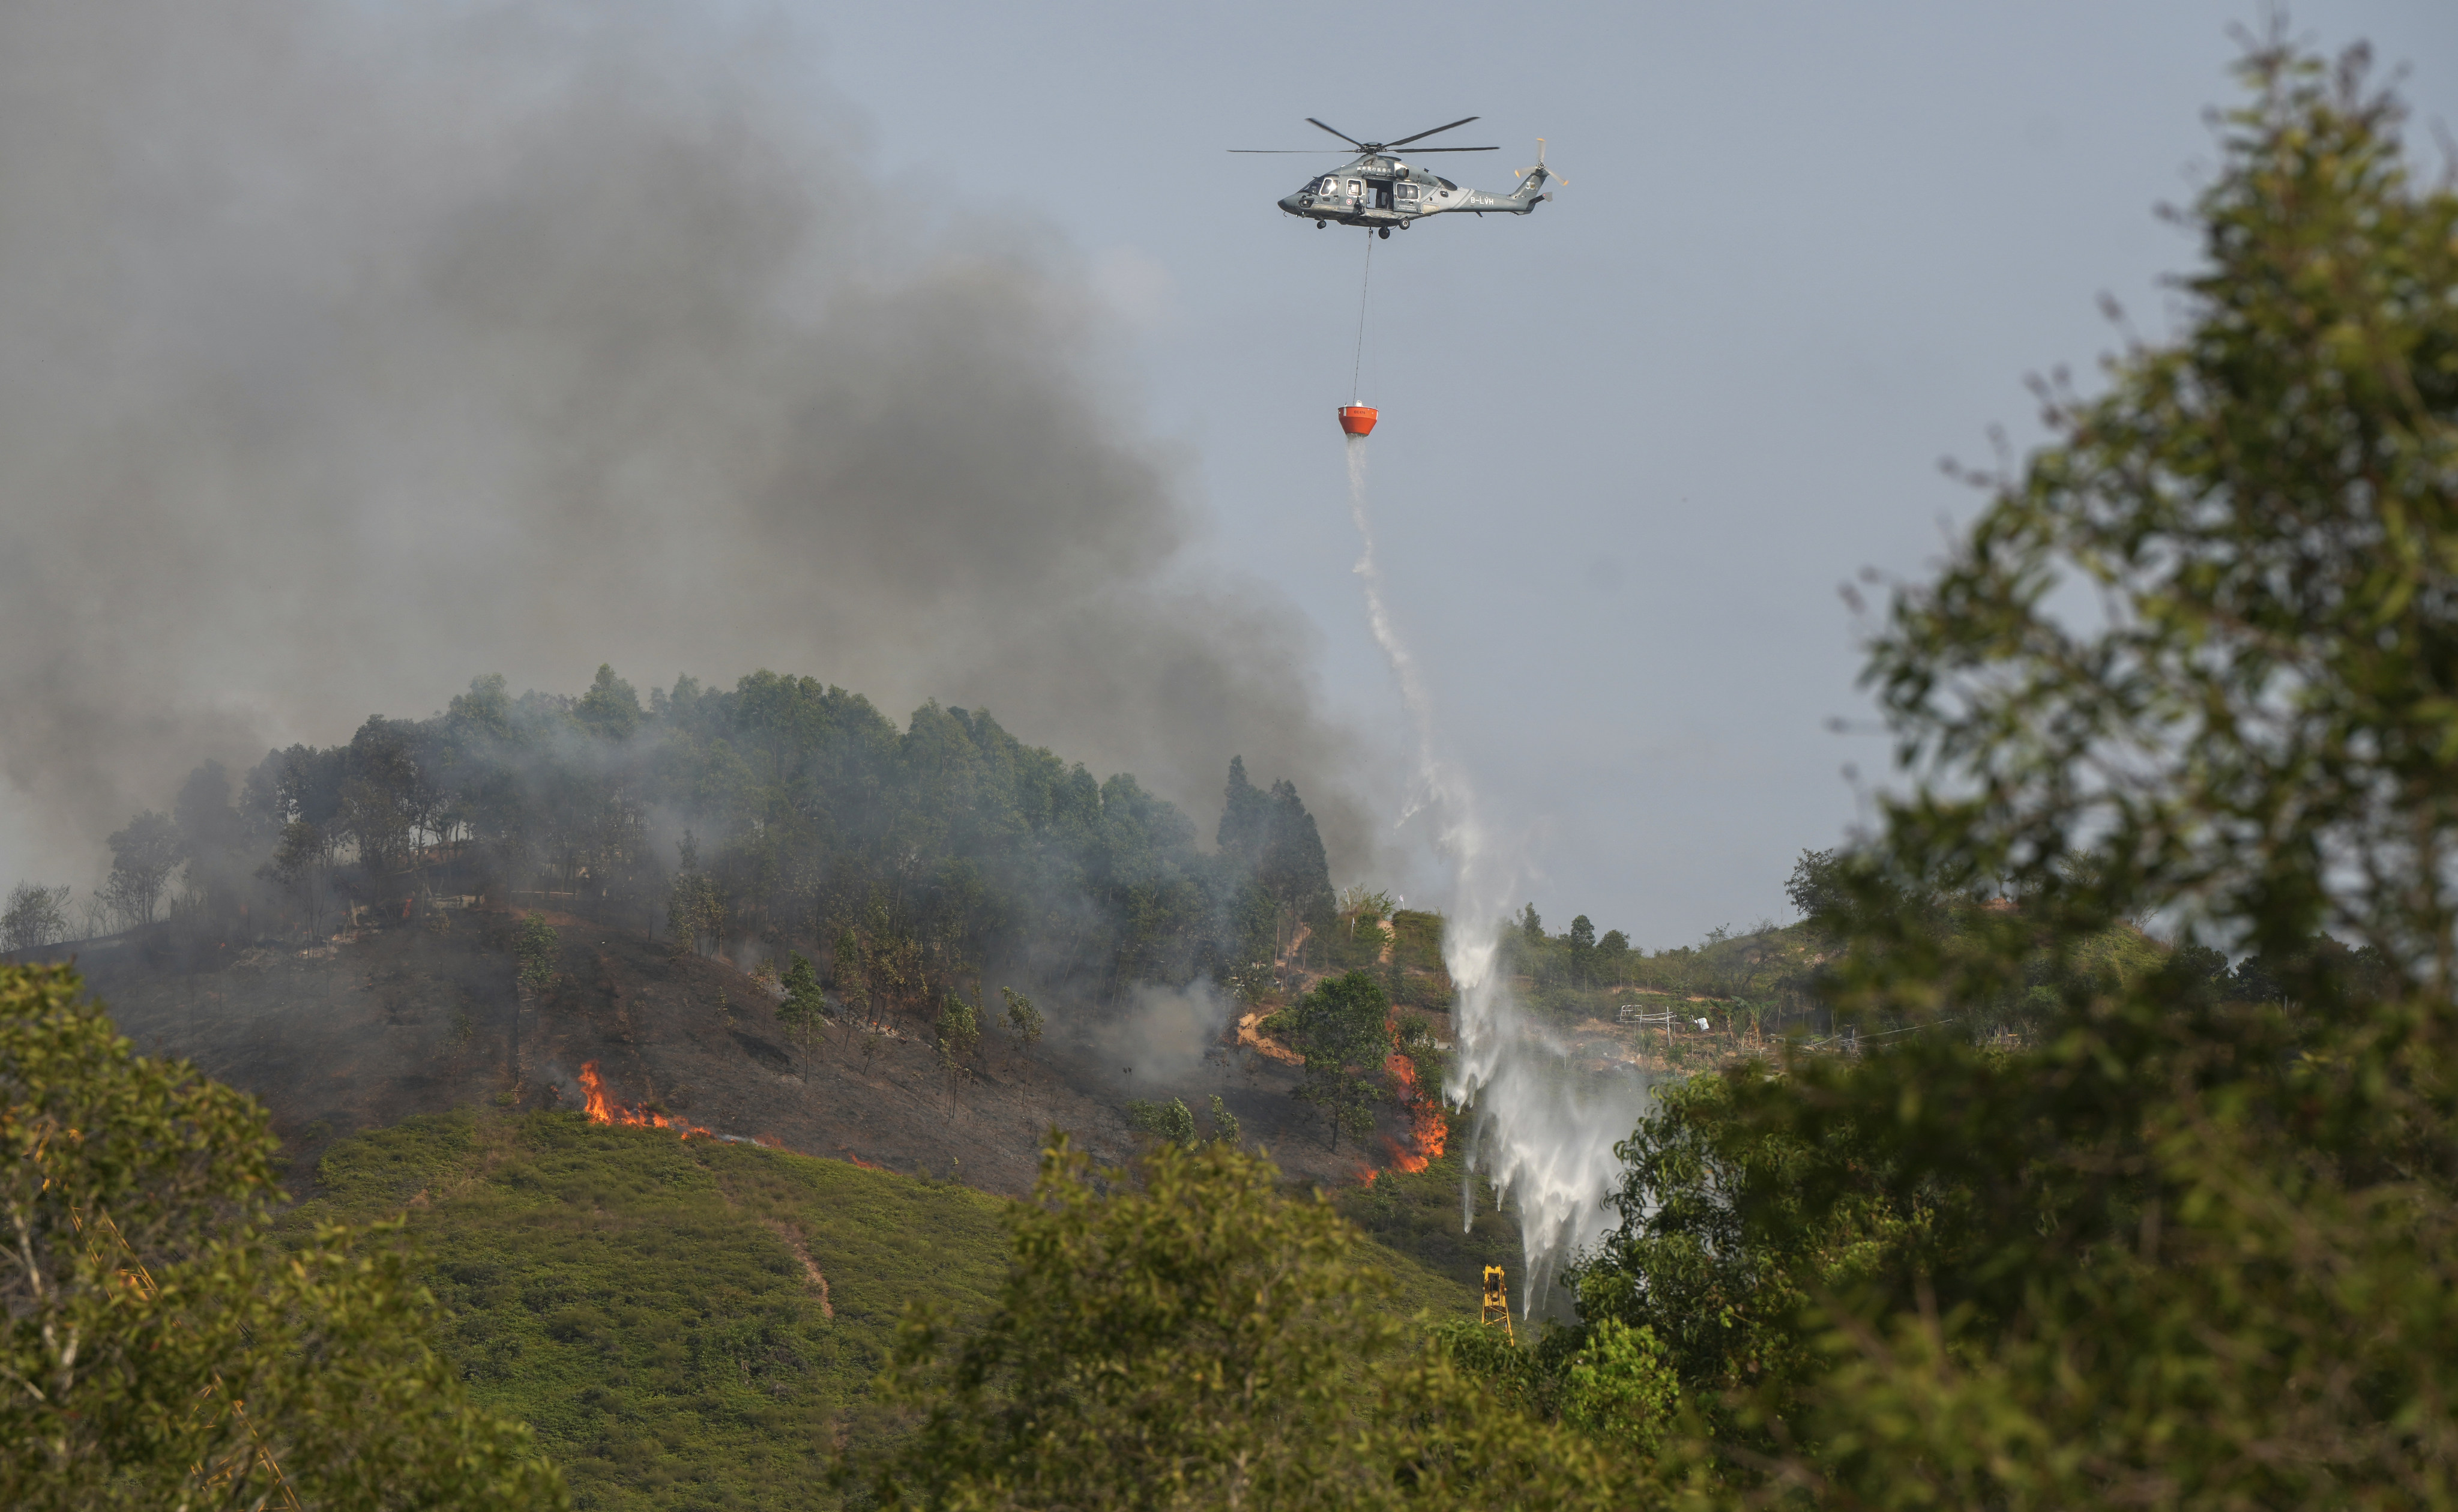 A Government Flying Service helicopter drops water on a hill fire in Yuen Long in March. Photo: Sam Tsang